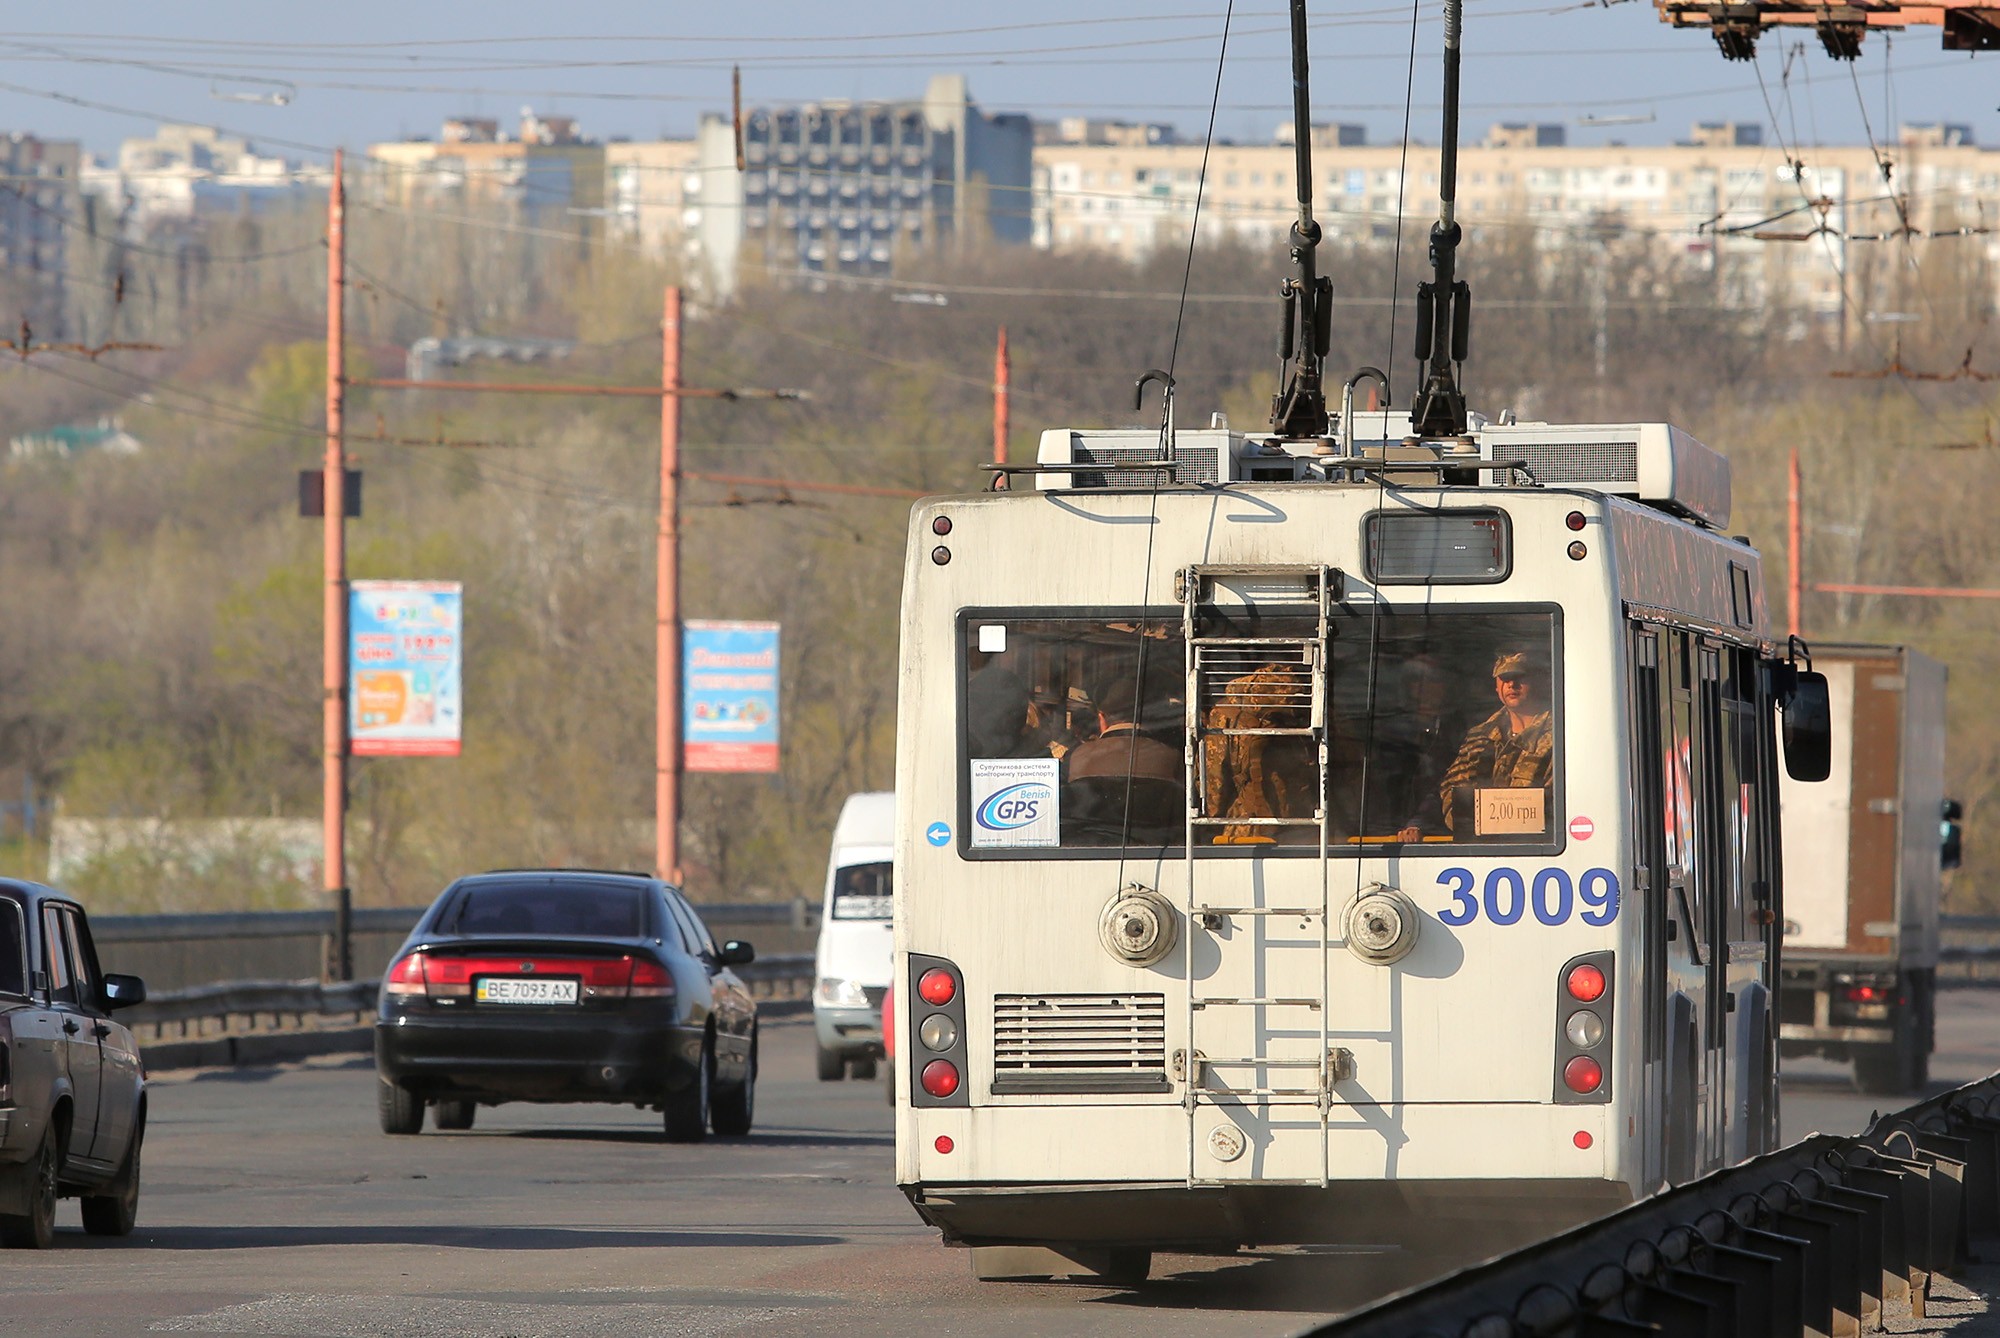 A buss goes through Varvarovskiy bridge which connects Mykolaiv and Odesa and is one of the city's features. Mykolaiv is known as a touch base to the legendary 79th airborne brigade.